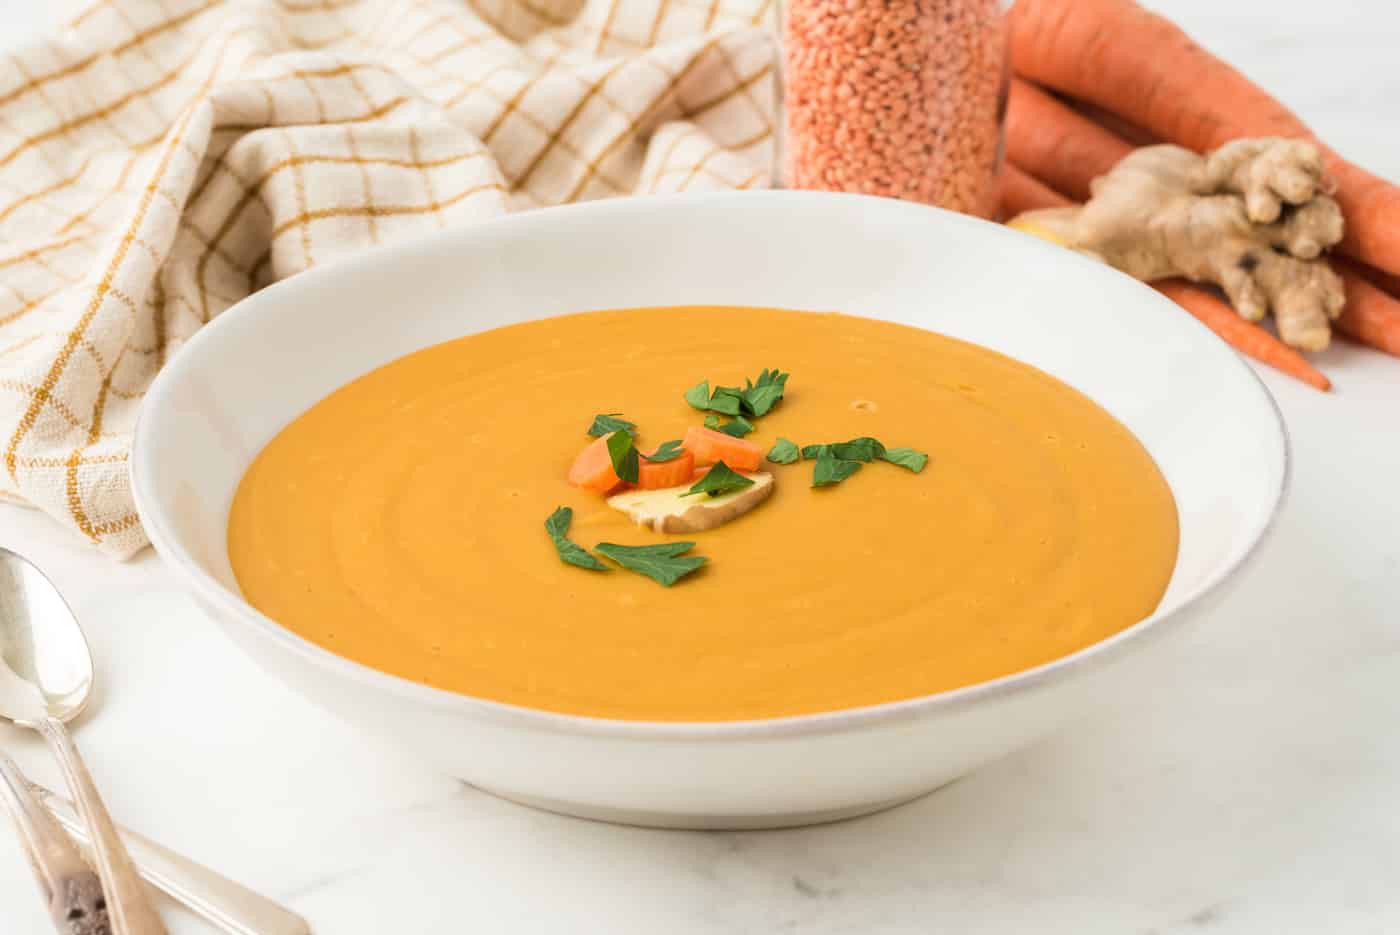 Instant Pot Carrot Soup with Ginger